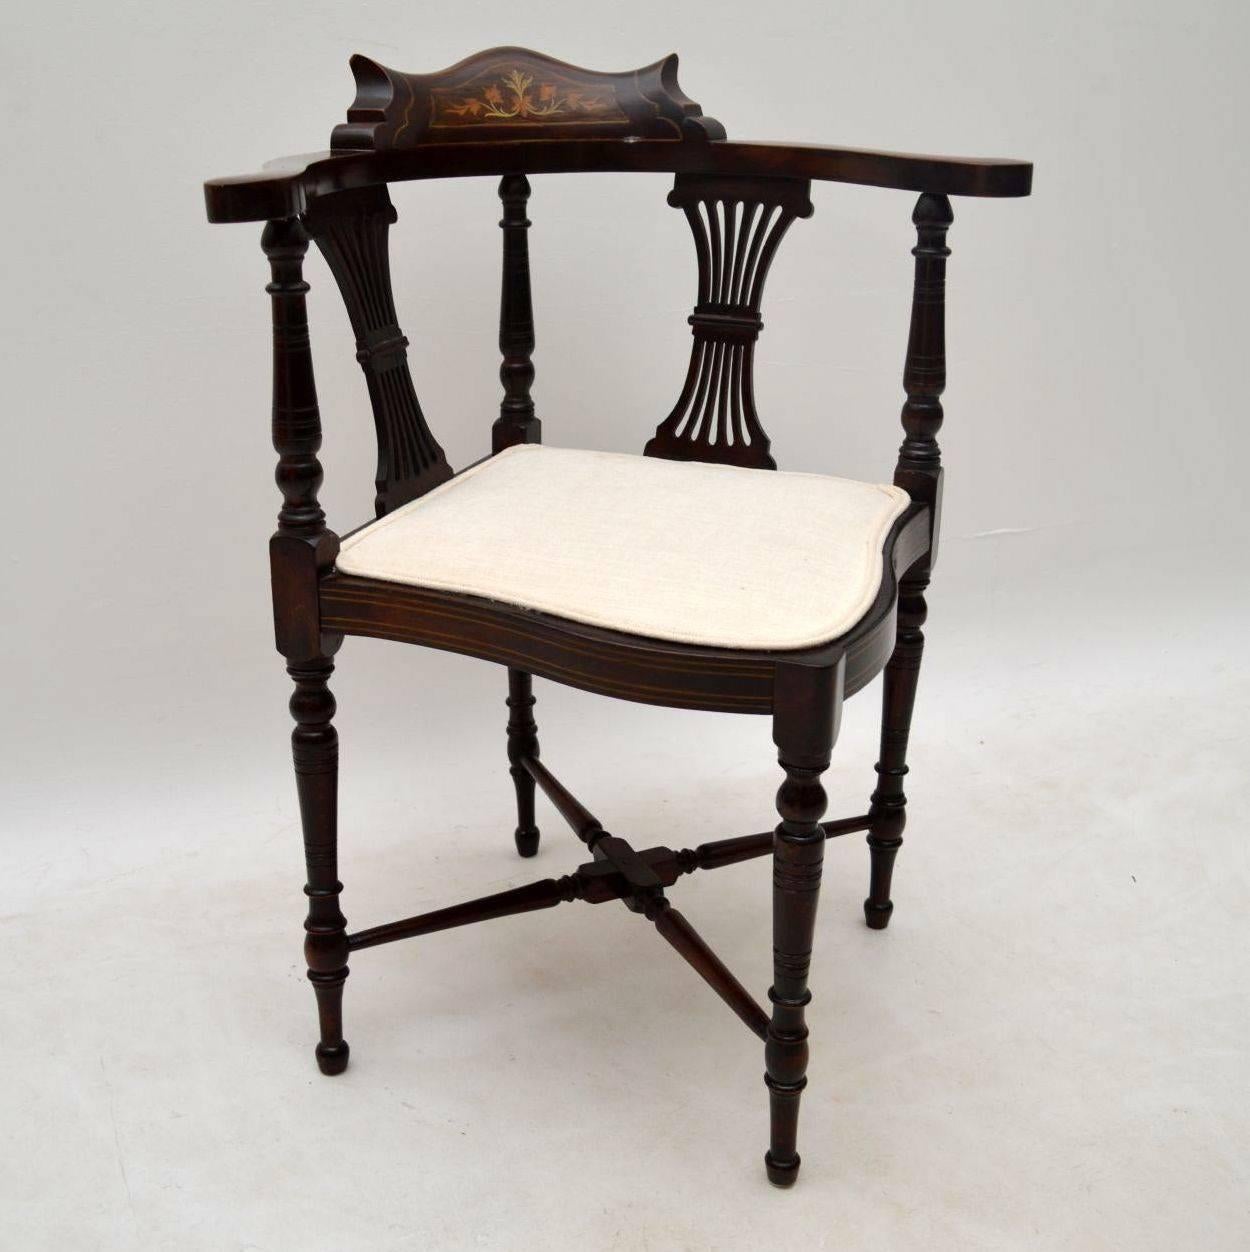 Antique Edwardian mahogany corner chair with some fine inlays of satinwood and other exotic woods. There is also some bone inlay within the top middle rosewood panel. This chair has many fine features & is well constructed. It has lyre shaped